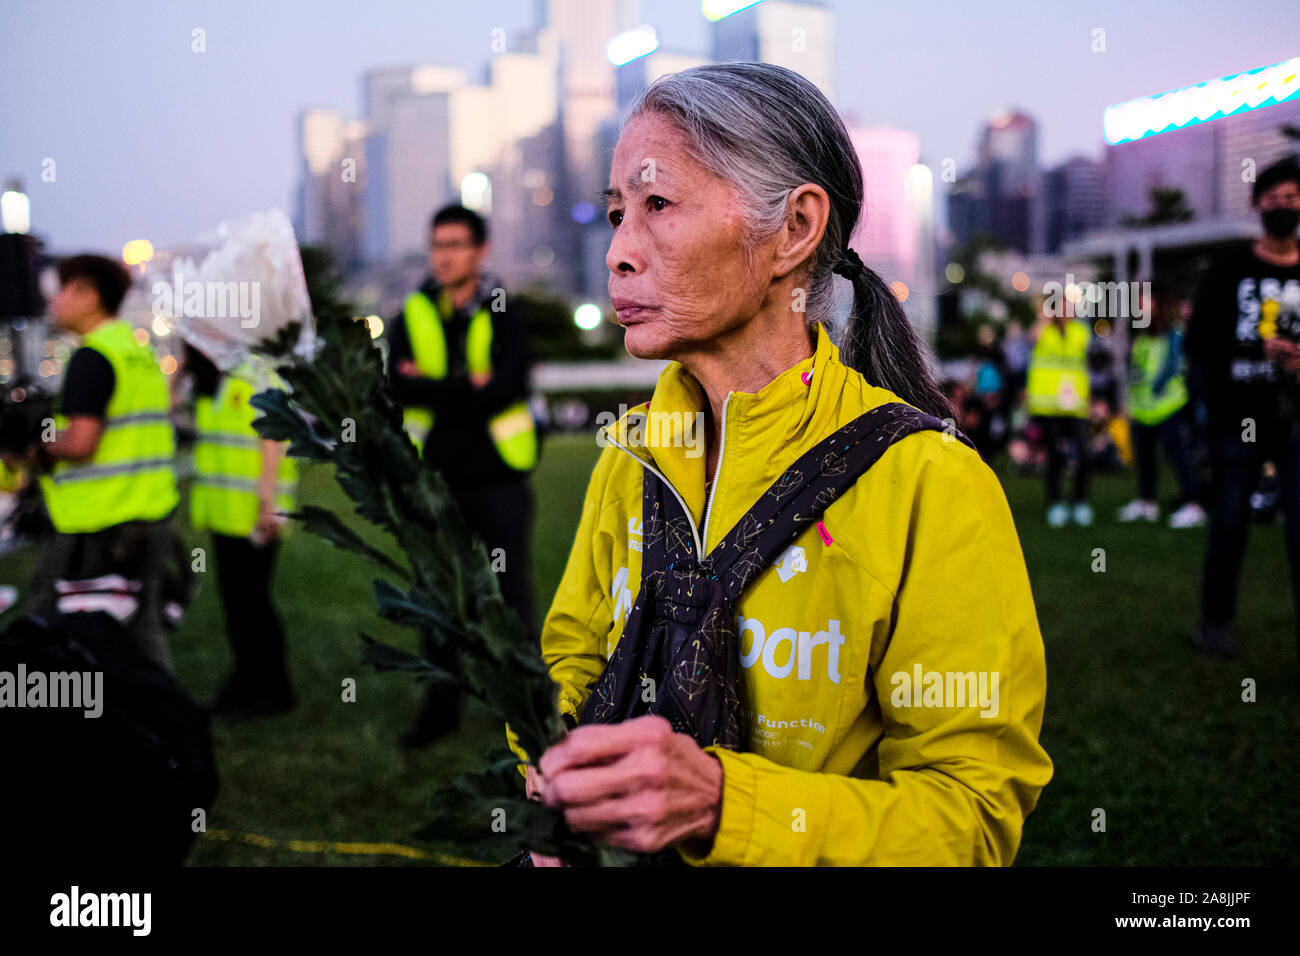 A senior woman with flowers during the rally.Memorial rally at Tamar Park in Hong Kong to mourn the death of a 22 years old university student, Alex Chow Tsz Lok who died from a serious brain injury during a fall on November 4th as police skirmished with demonstrators last weekend. He was left in critical condition and died after suffering a cardiac arrest. Stock Photo